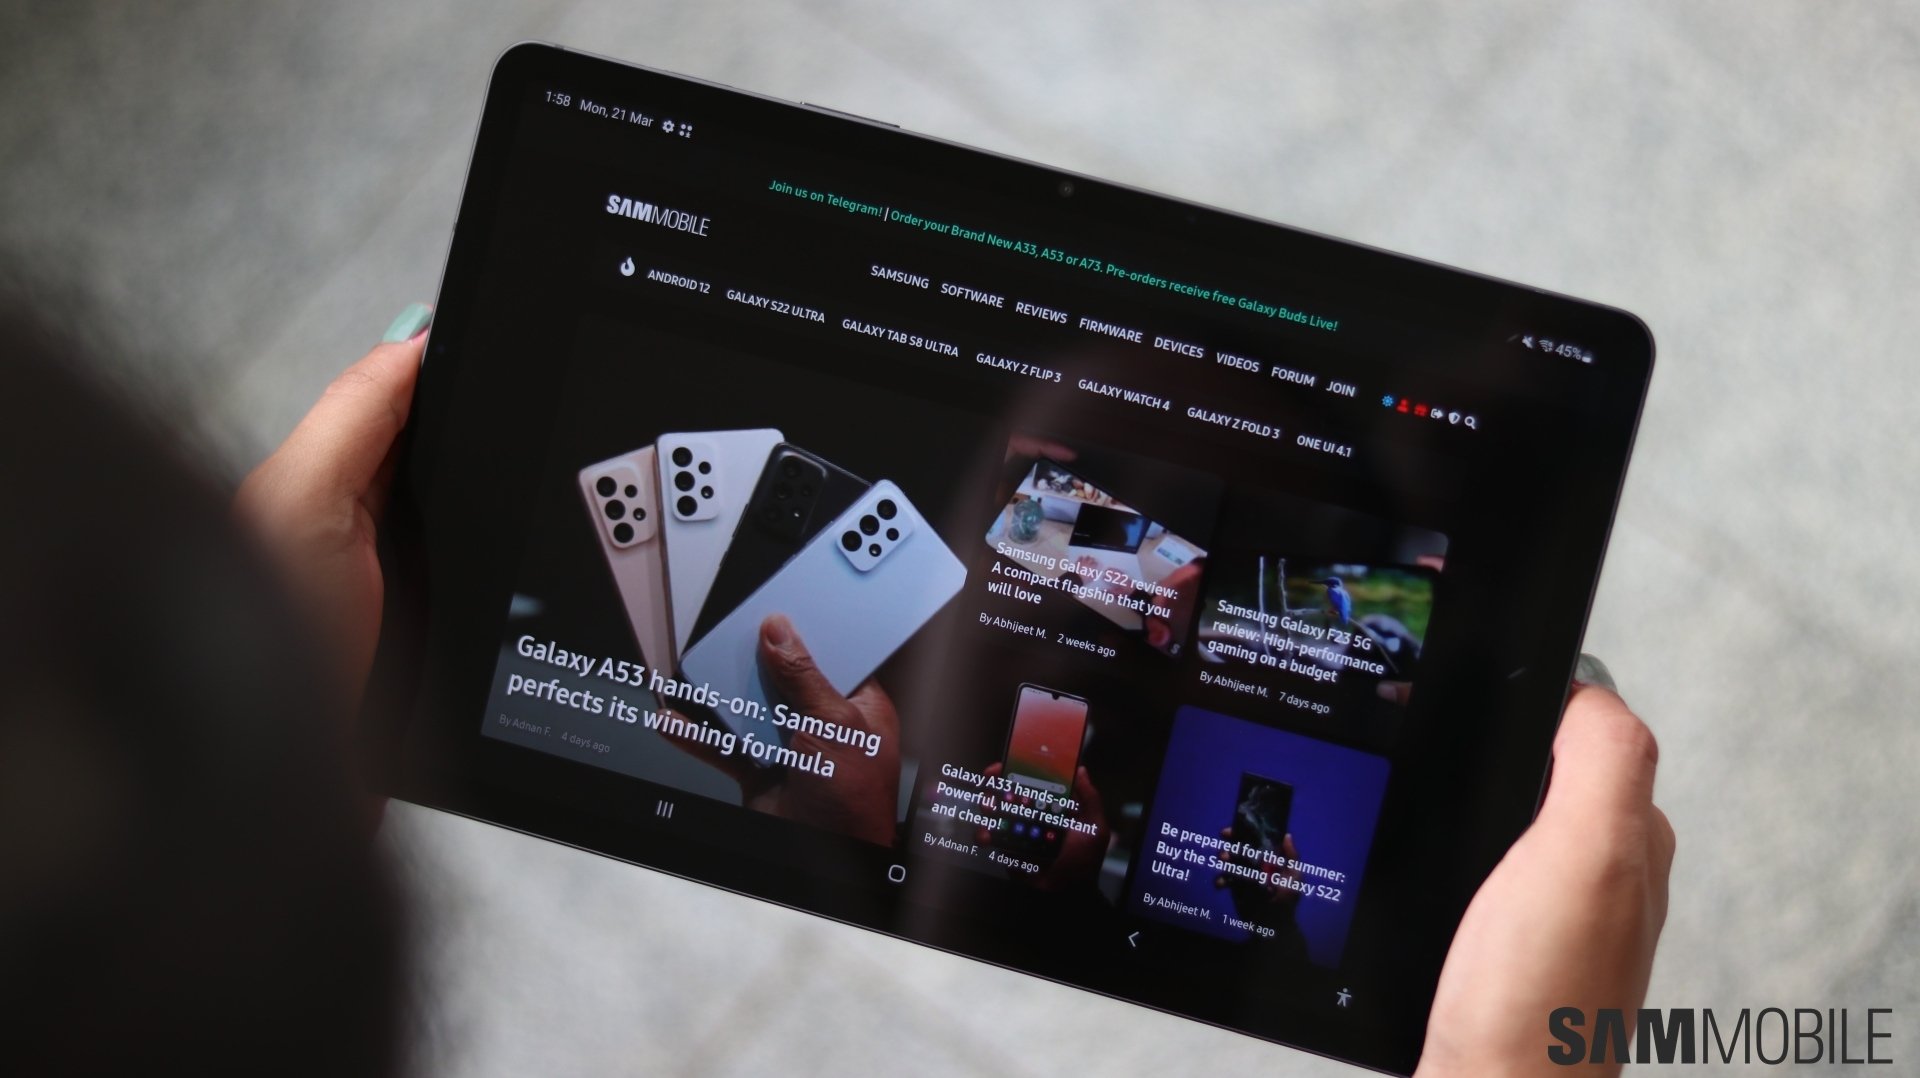 Samsung Galaxy Tab S8 receives One UI 5.1 update, gets lots of new features  - SamMobile